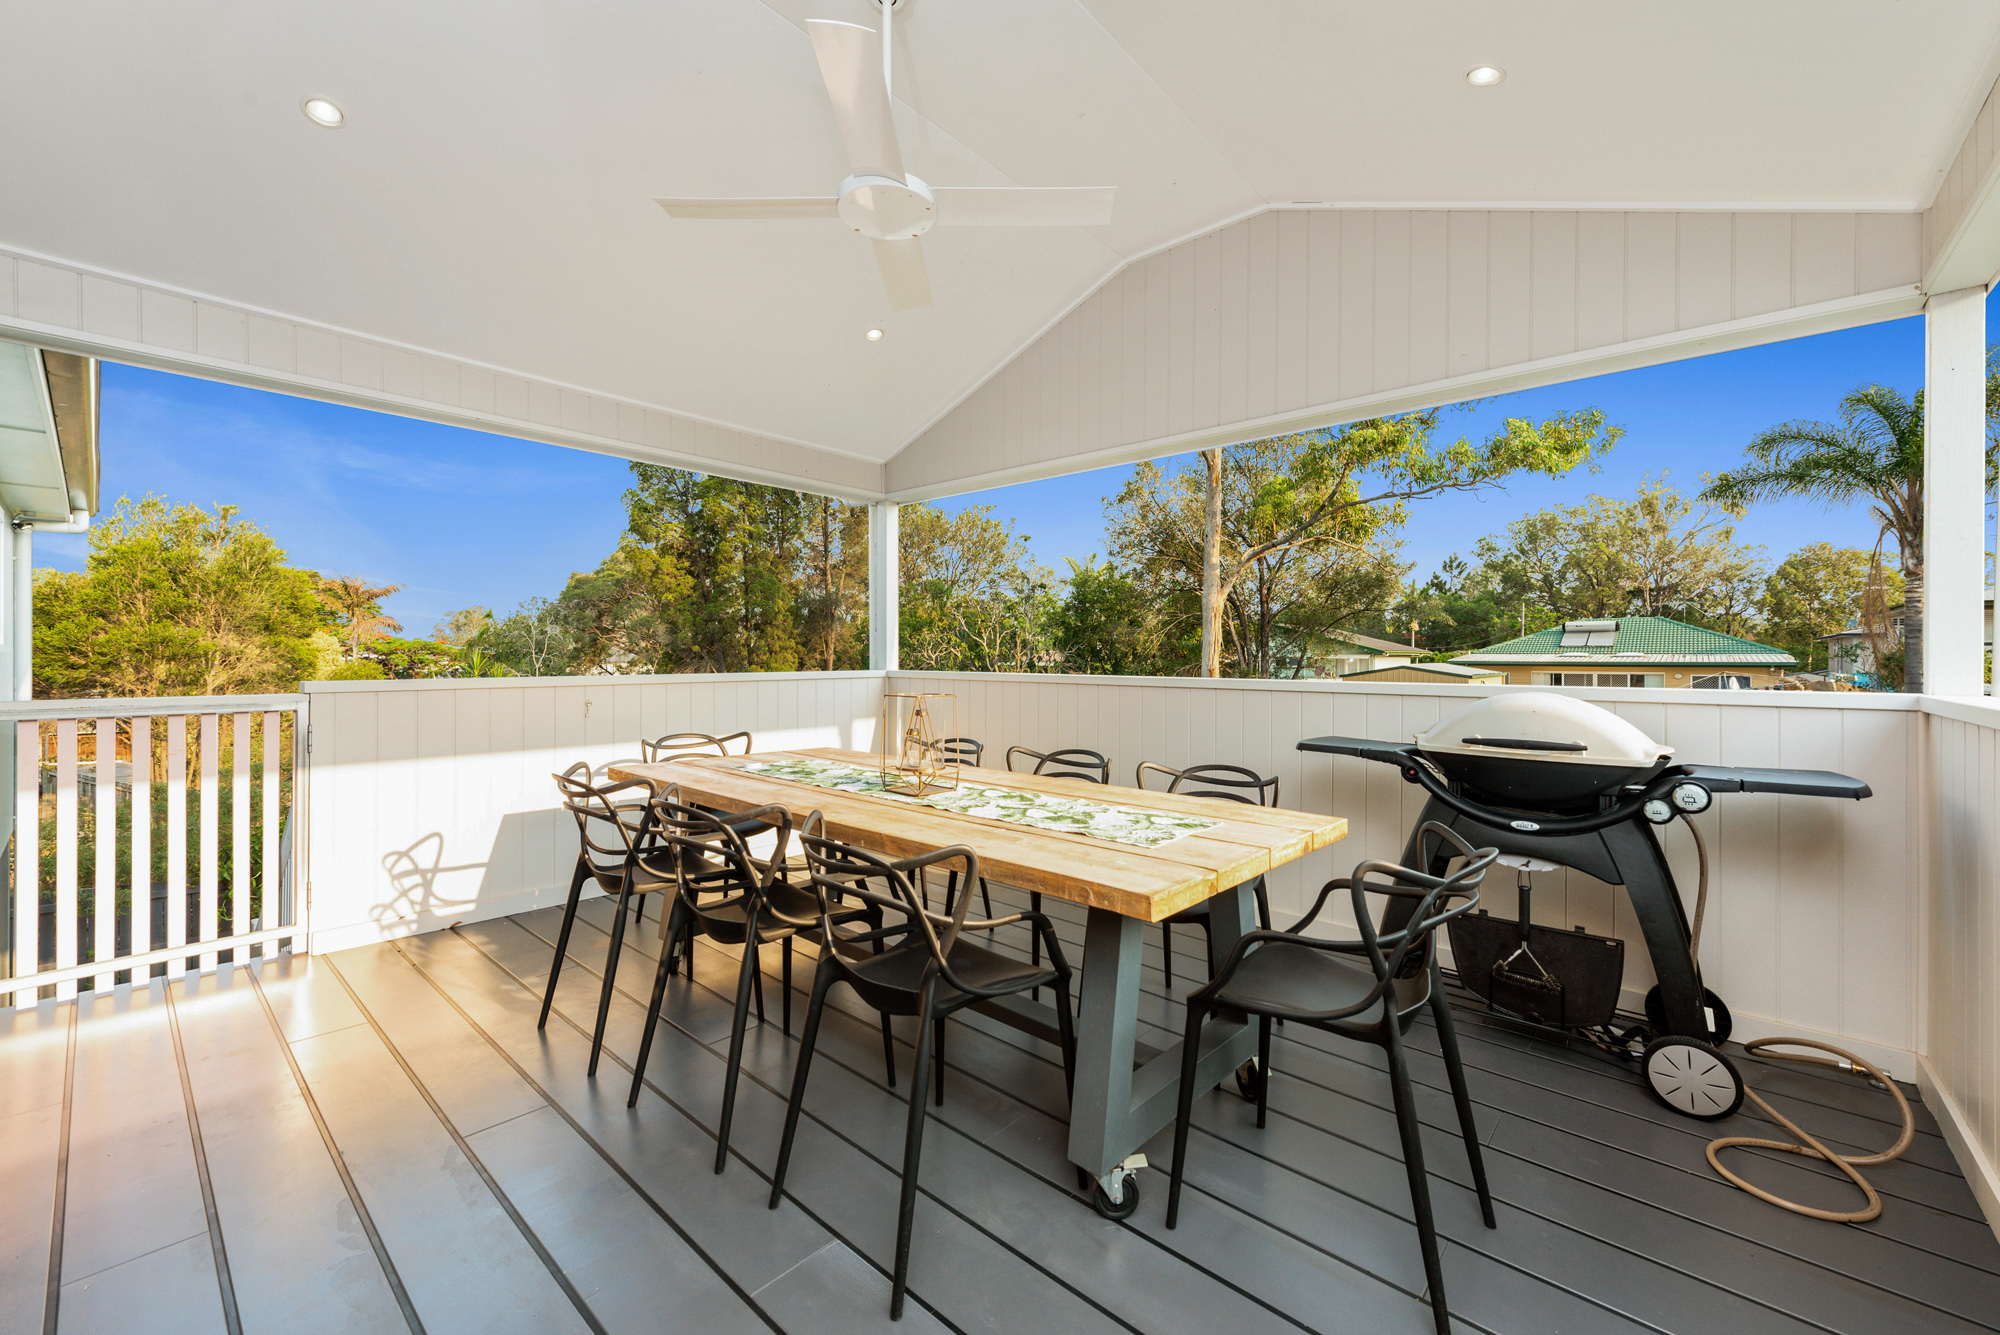 Deck for an extension in Oxley Brisbane